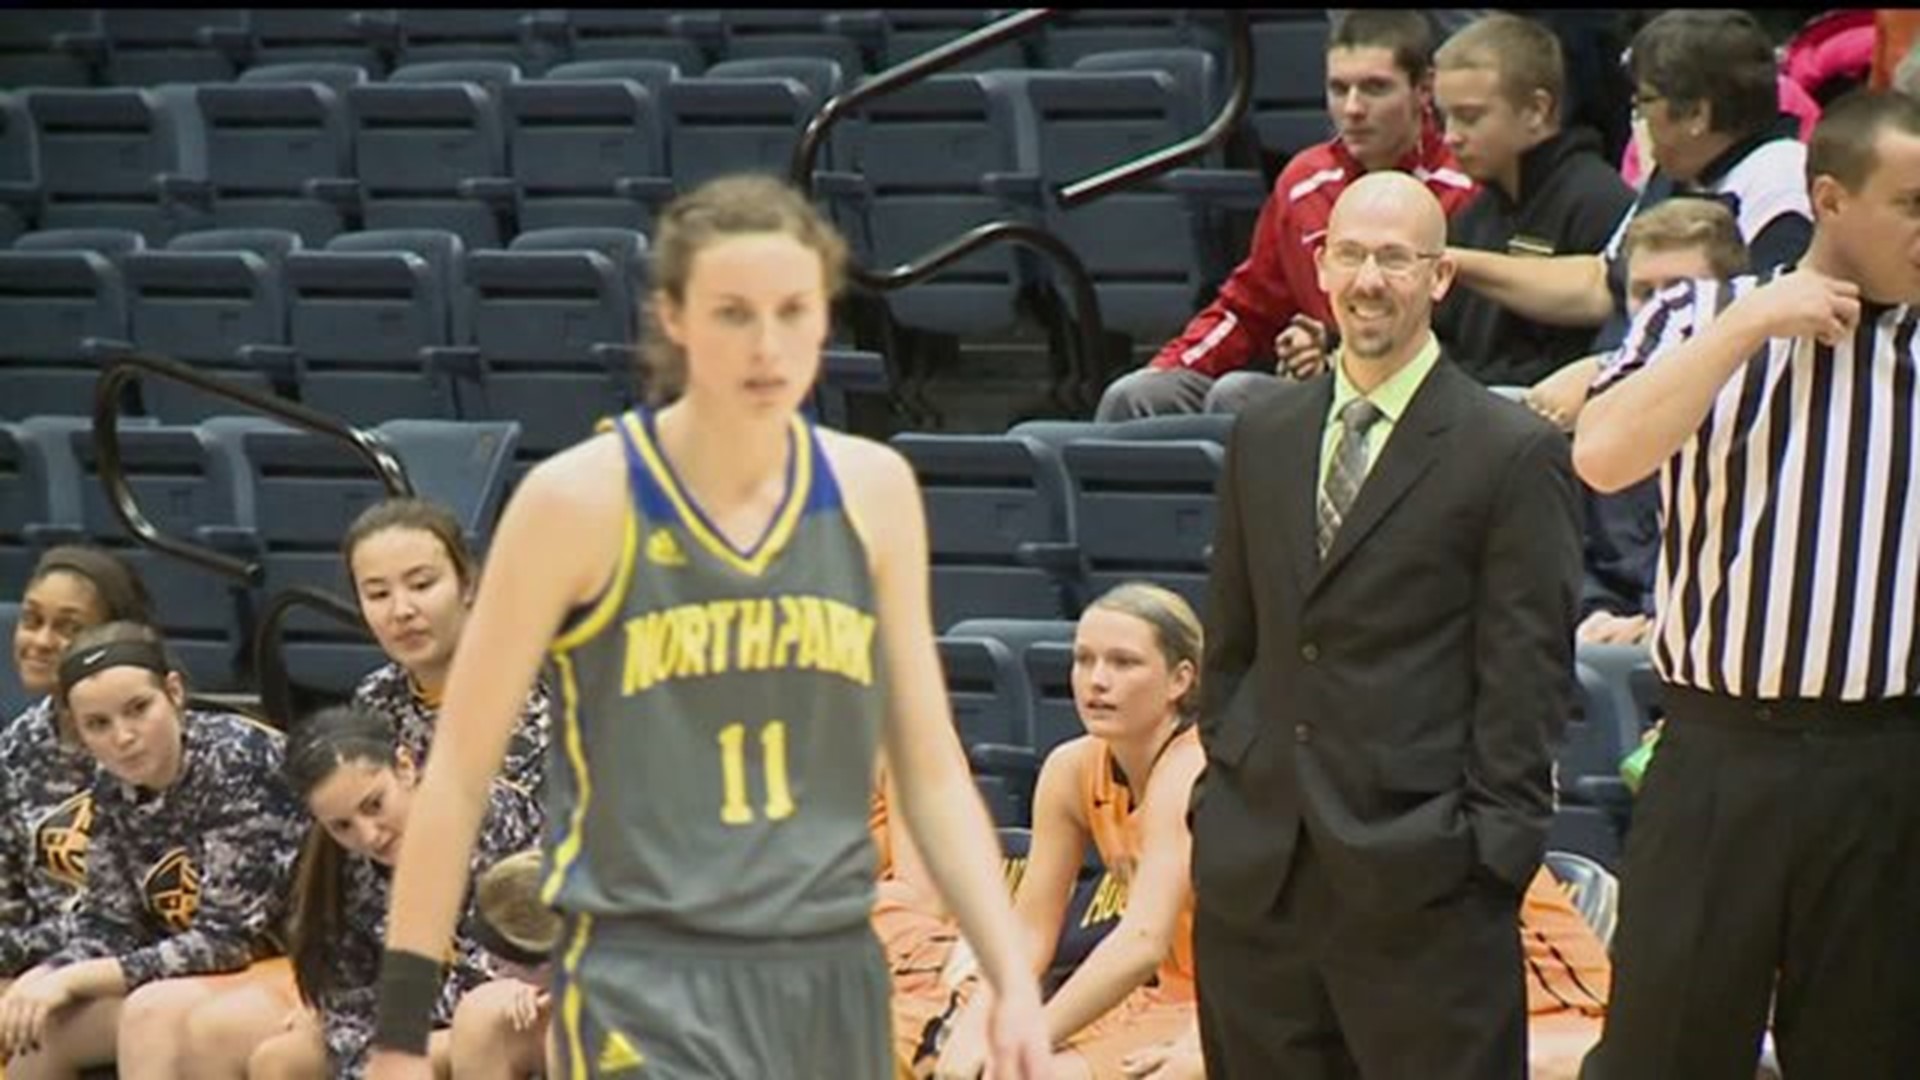 Augie WBB moves to 6-0, defeats North Park